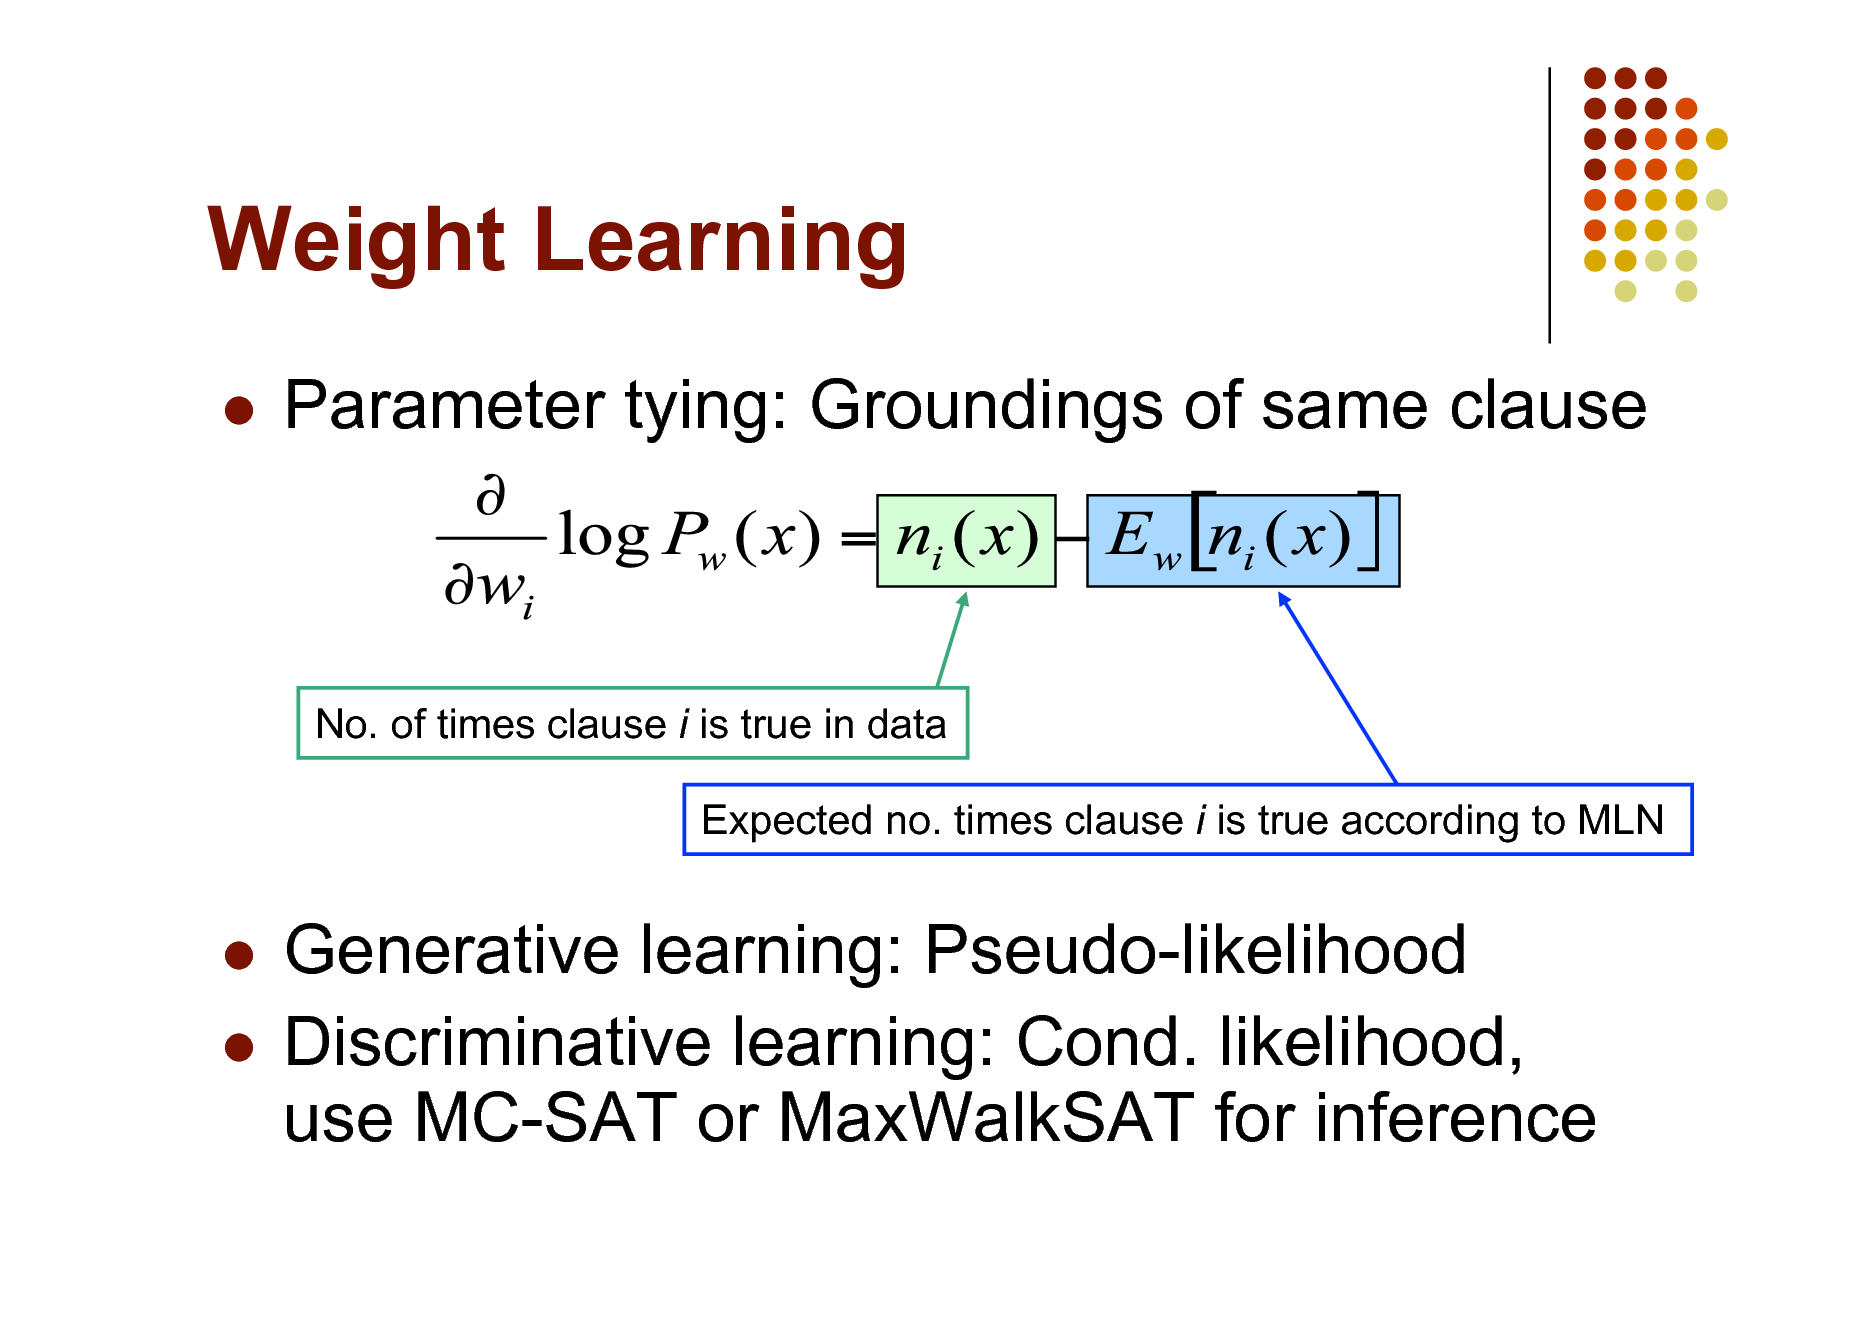 Slide: Weight Learning


Parameter tying: Groundings of same clause

No. of times clause i is true in data Expected no. times clause i is true according to MLN

Generative learning: Pseudo-likelihood  Discriminative learning: Cond. likelihood, use MC-SAT or MaxWalkSAT for inference


